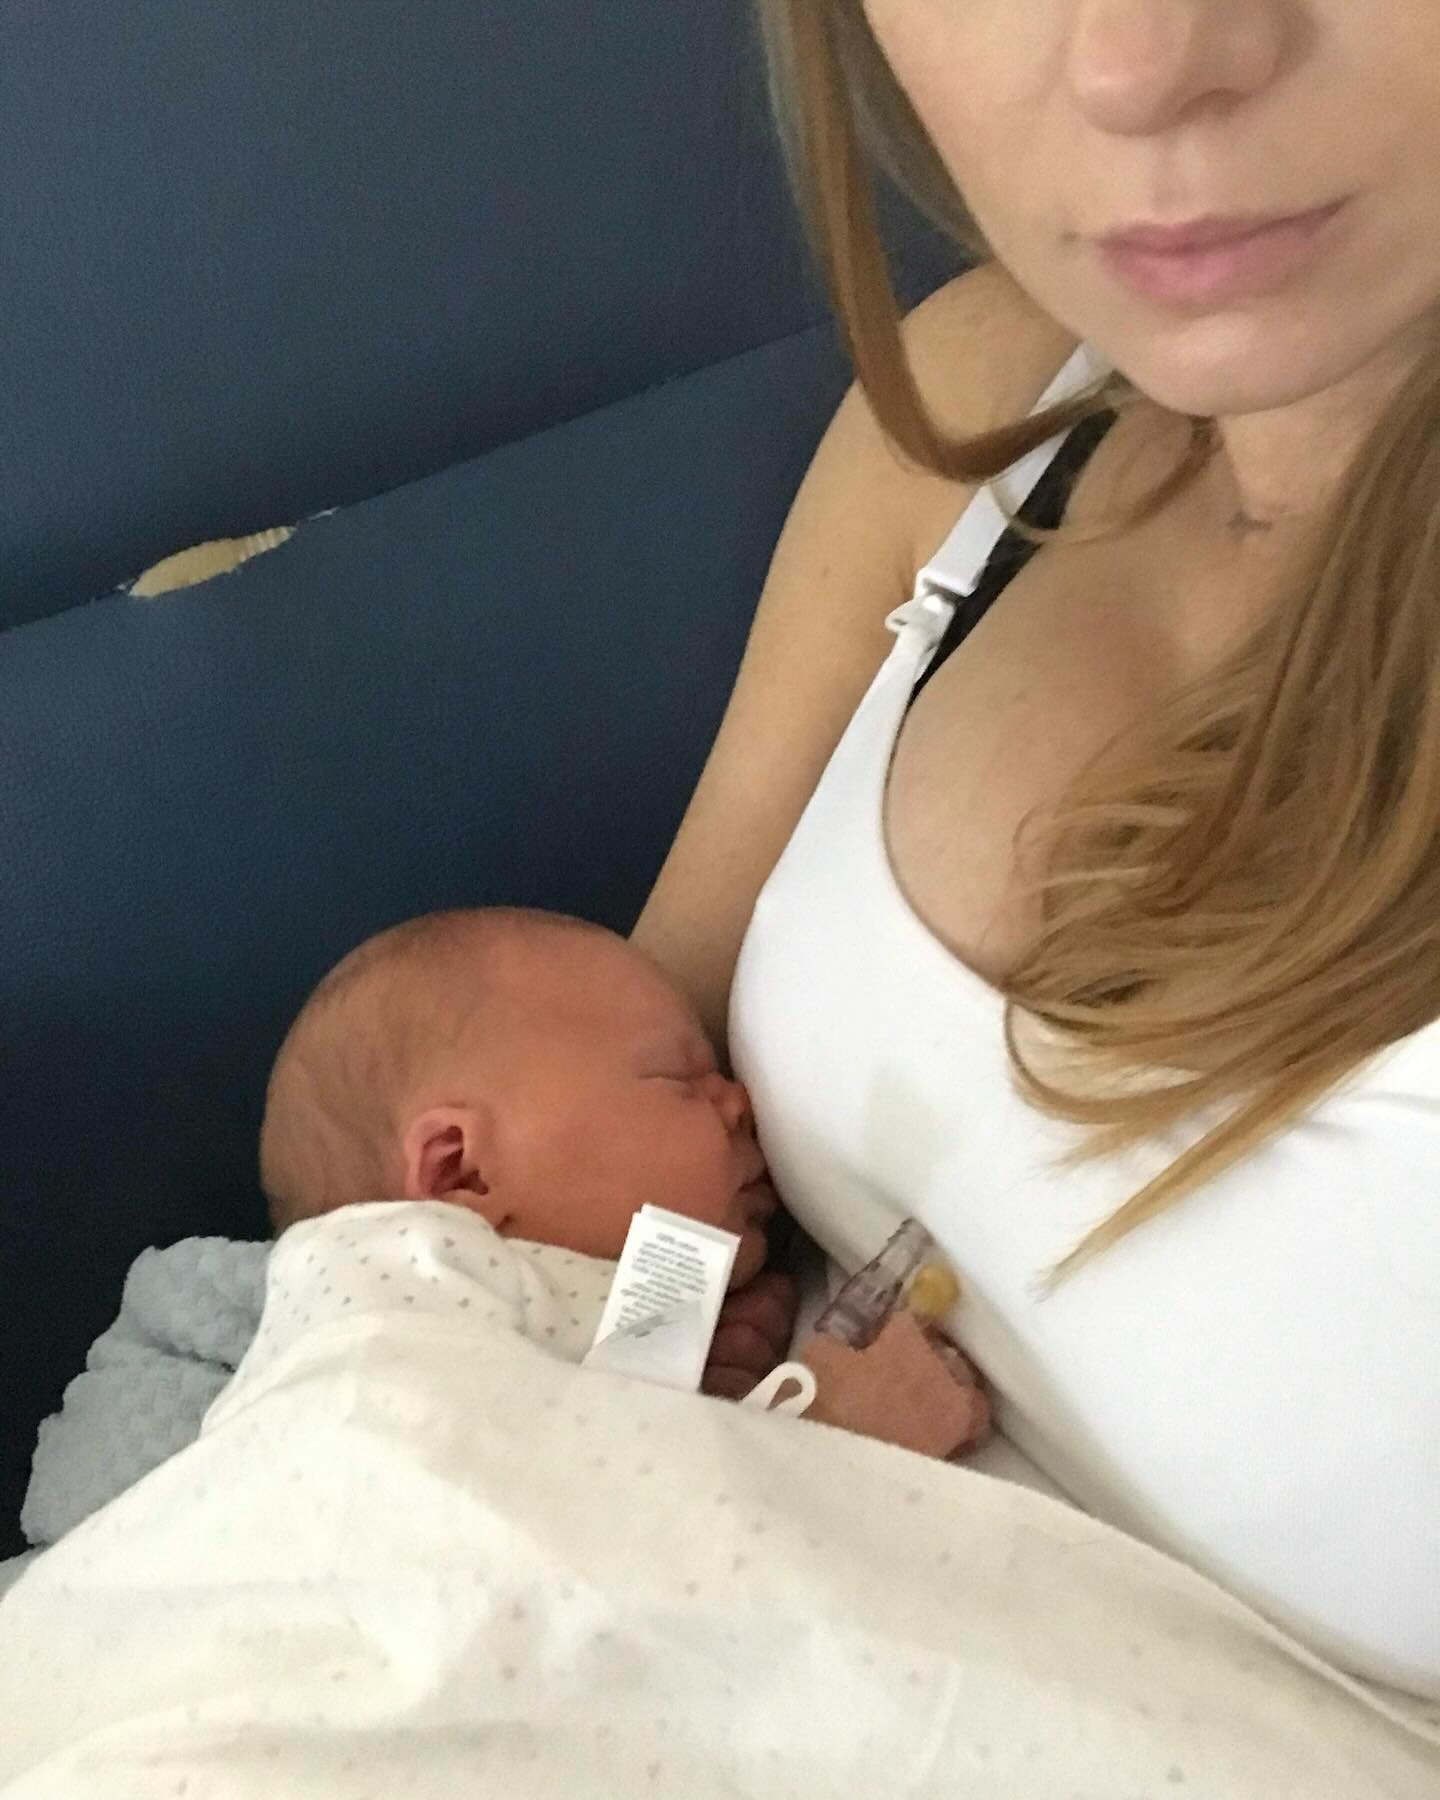 Four days into motherhood, I wanted to run away. I had no choice in the matter&mdash;as I sat in Crumlin hospital with my newborn being prodded with needles &amp; hooked up to an IV, my instinct screamed at everyone to leave her alone. I didn&rsquo;t